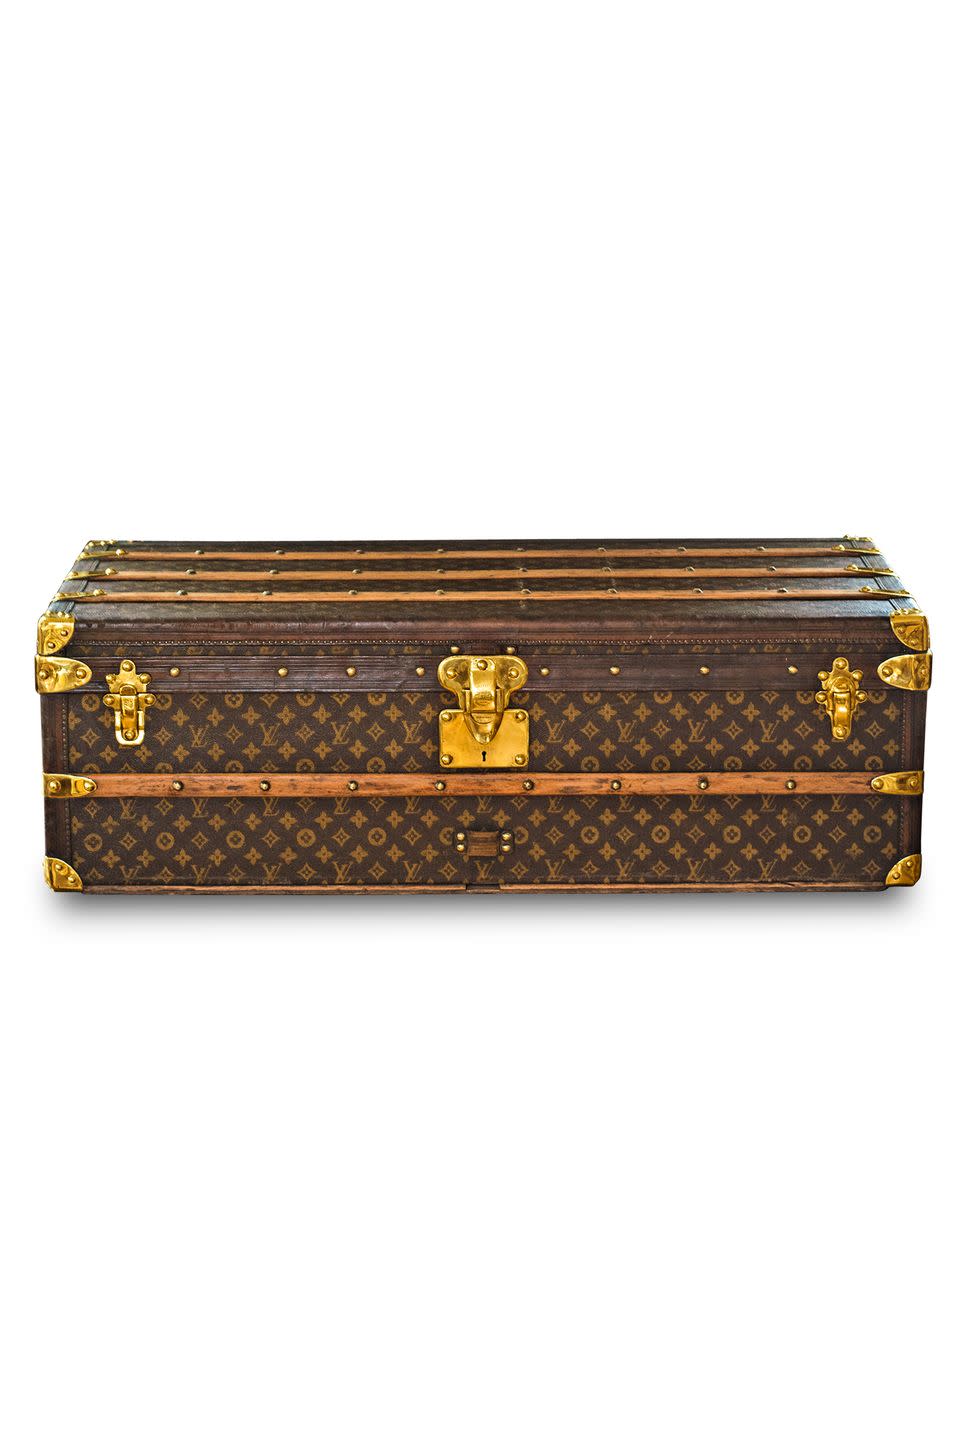 Early 20th-Century French Louis Vuitton Steamer Trunk